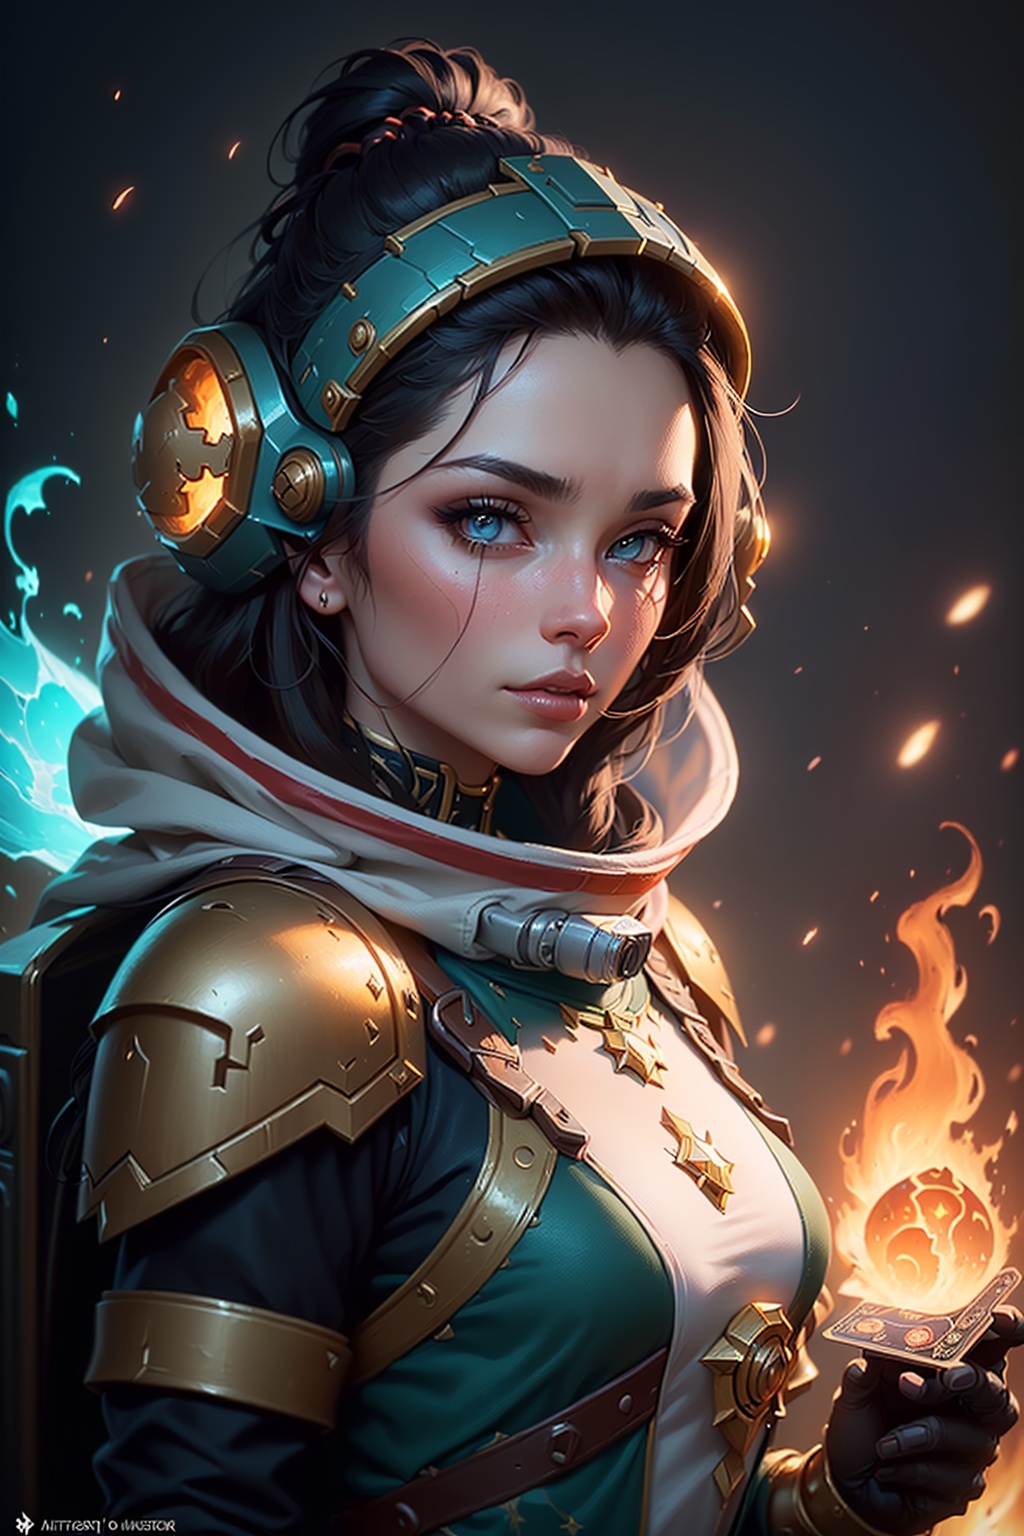 ((best quality)), ((masterpiece)), (detailed), woman standing before fire, (Jason Benjamin:1.2), (Artstation contest winner:1.1), (fantasy art:1.3), (portrait armored astronaut girl:1.2), (Peter Mohrbacher:1.1), (unreal engine:1.1), (Hearthstone card game artwork:1.1), spiked metal armor, (dynamic composition:1.3), (8k resolution:1.2)